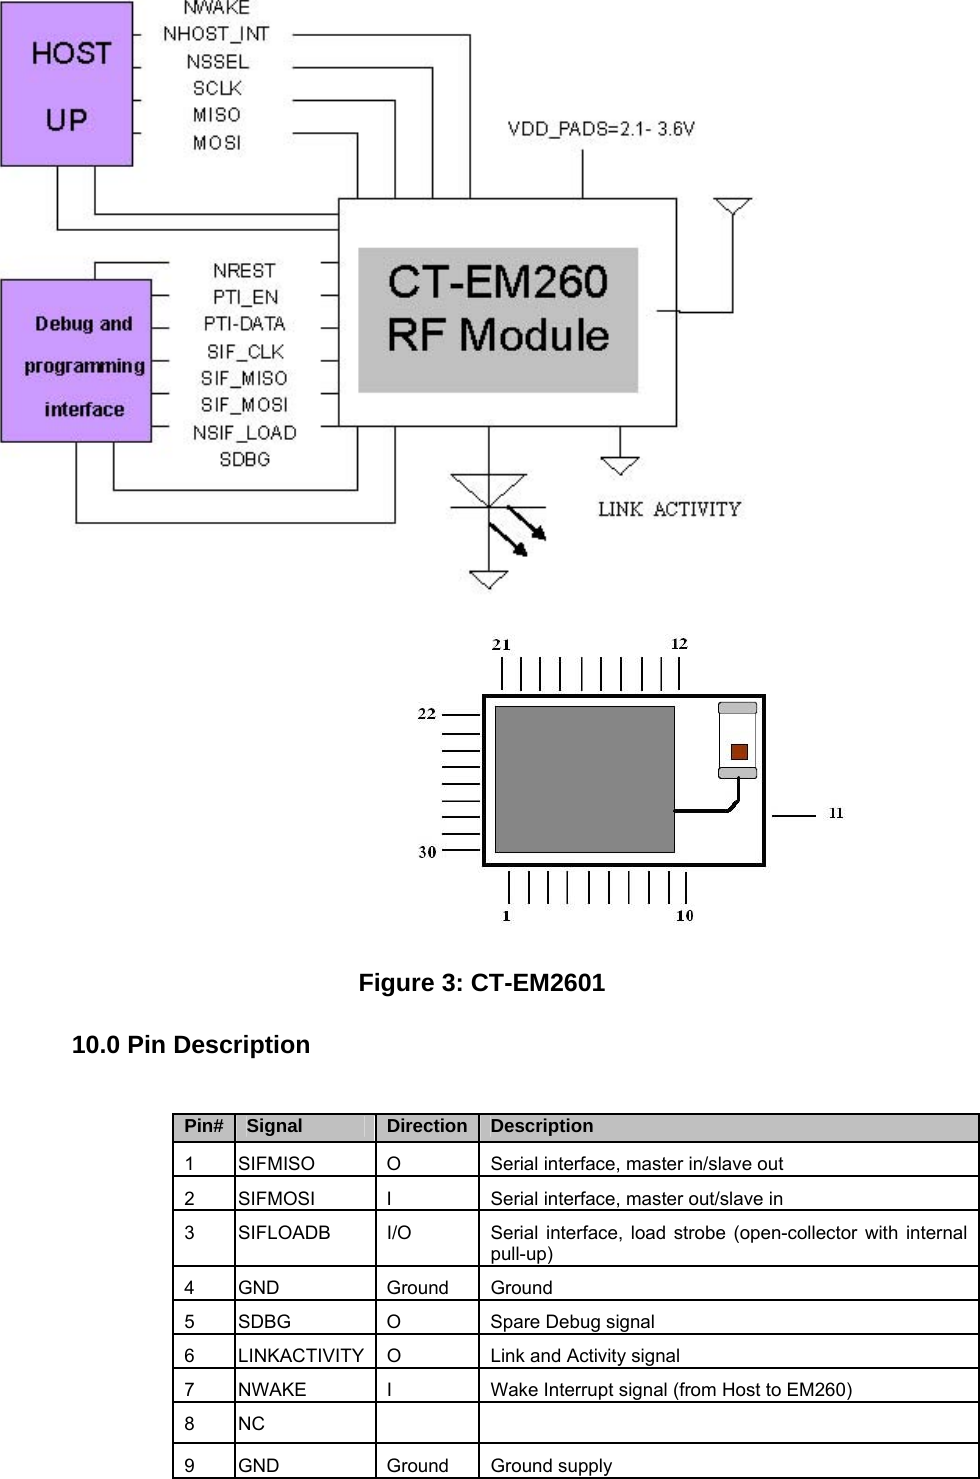    Figure 3: CT-EM2601    10.0 Pin Description    Pin#   Signal   Direction  Description   1   SIFMISO   O   Serial interface, master in/slave out 2   SIFMOSI   I   Serial interface, master out/slave in 3   SIFLOADB   I/O   Serial interface, load strobe (open-collector with internal pull-up) 4   GND   Ground   Ground  5   SDBG   O   Spare Debug signal 6    LINKACTIVITY  O    Link and Activity signal 7    NWAKE    I    Wake Interrupt signal (from Host to EM260) 8   NC       9   GND   Ground   Ground supply 